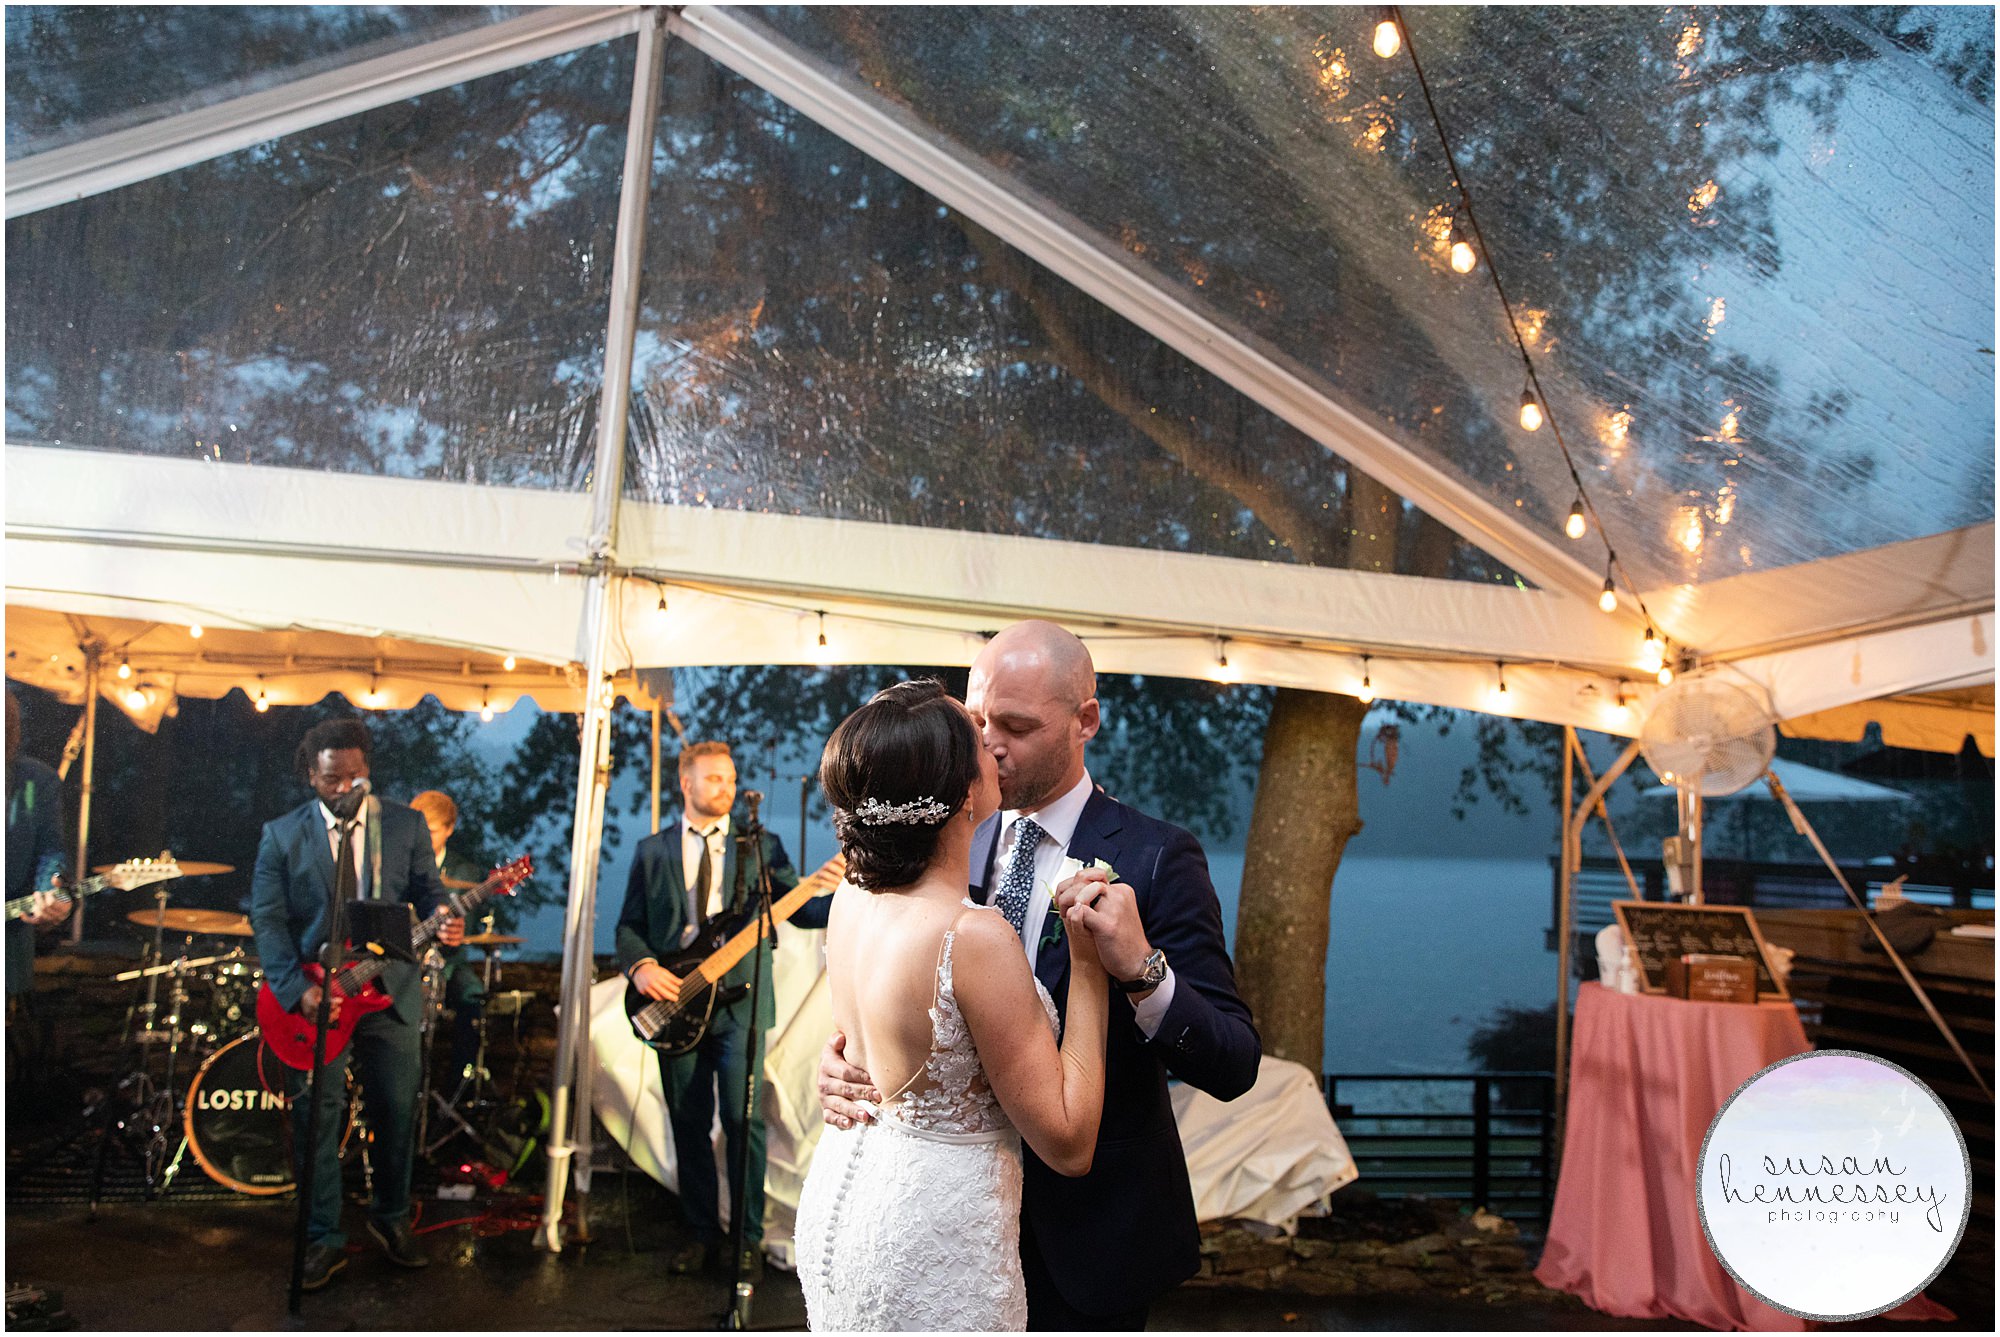 First dance for couple during backyard wedding